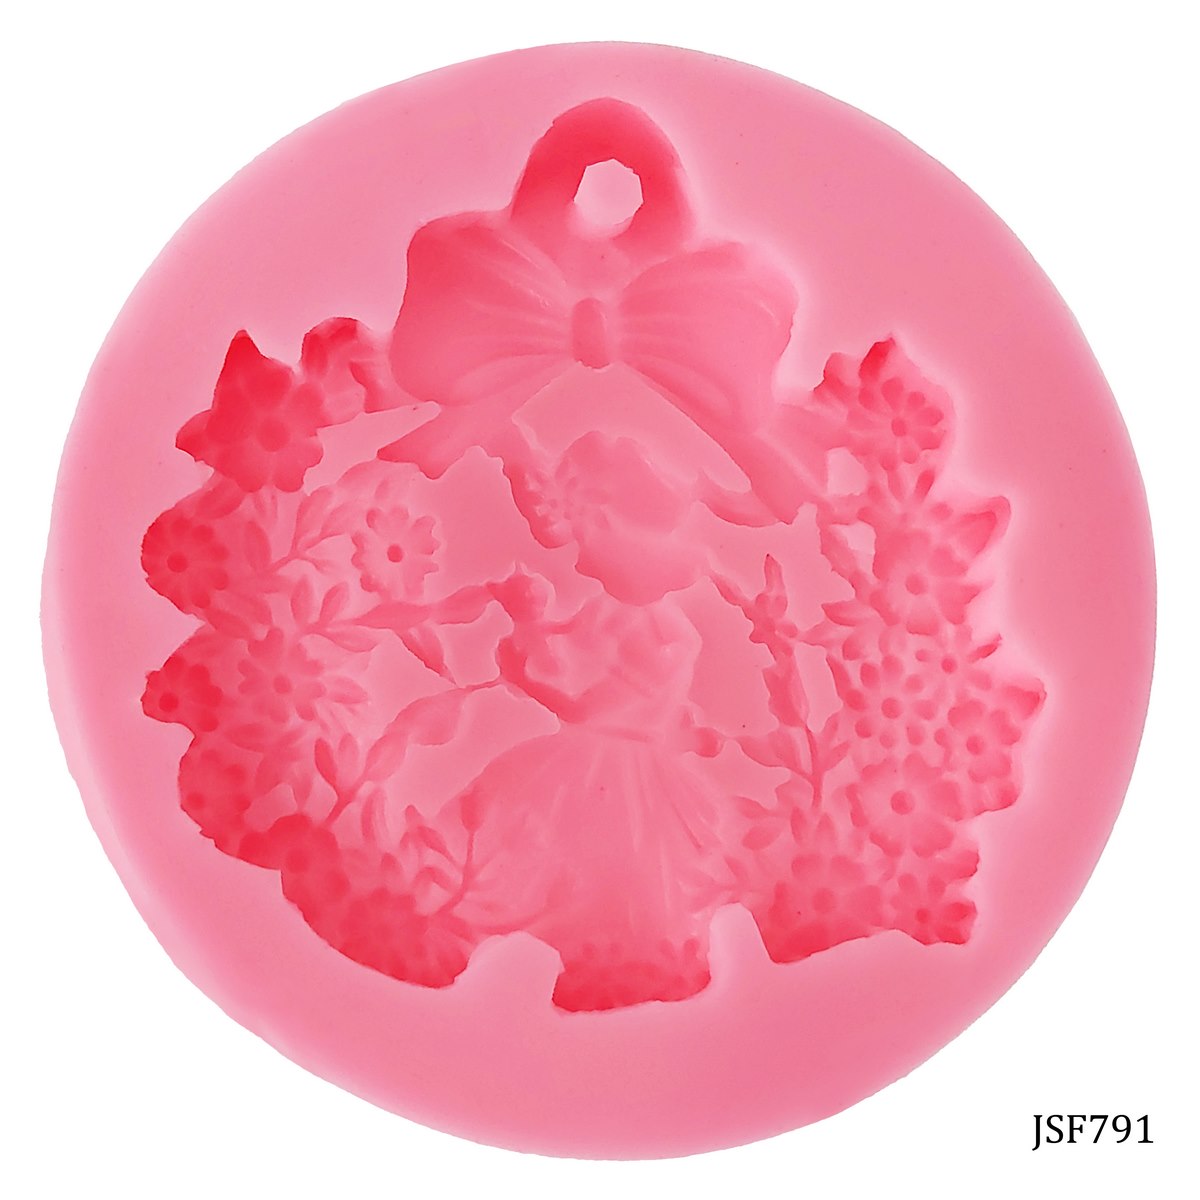 jags-mumbai Mould Silicone Mould Princess Floral Design JSF791